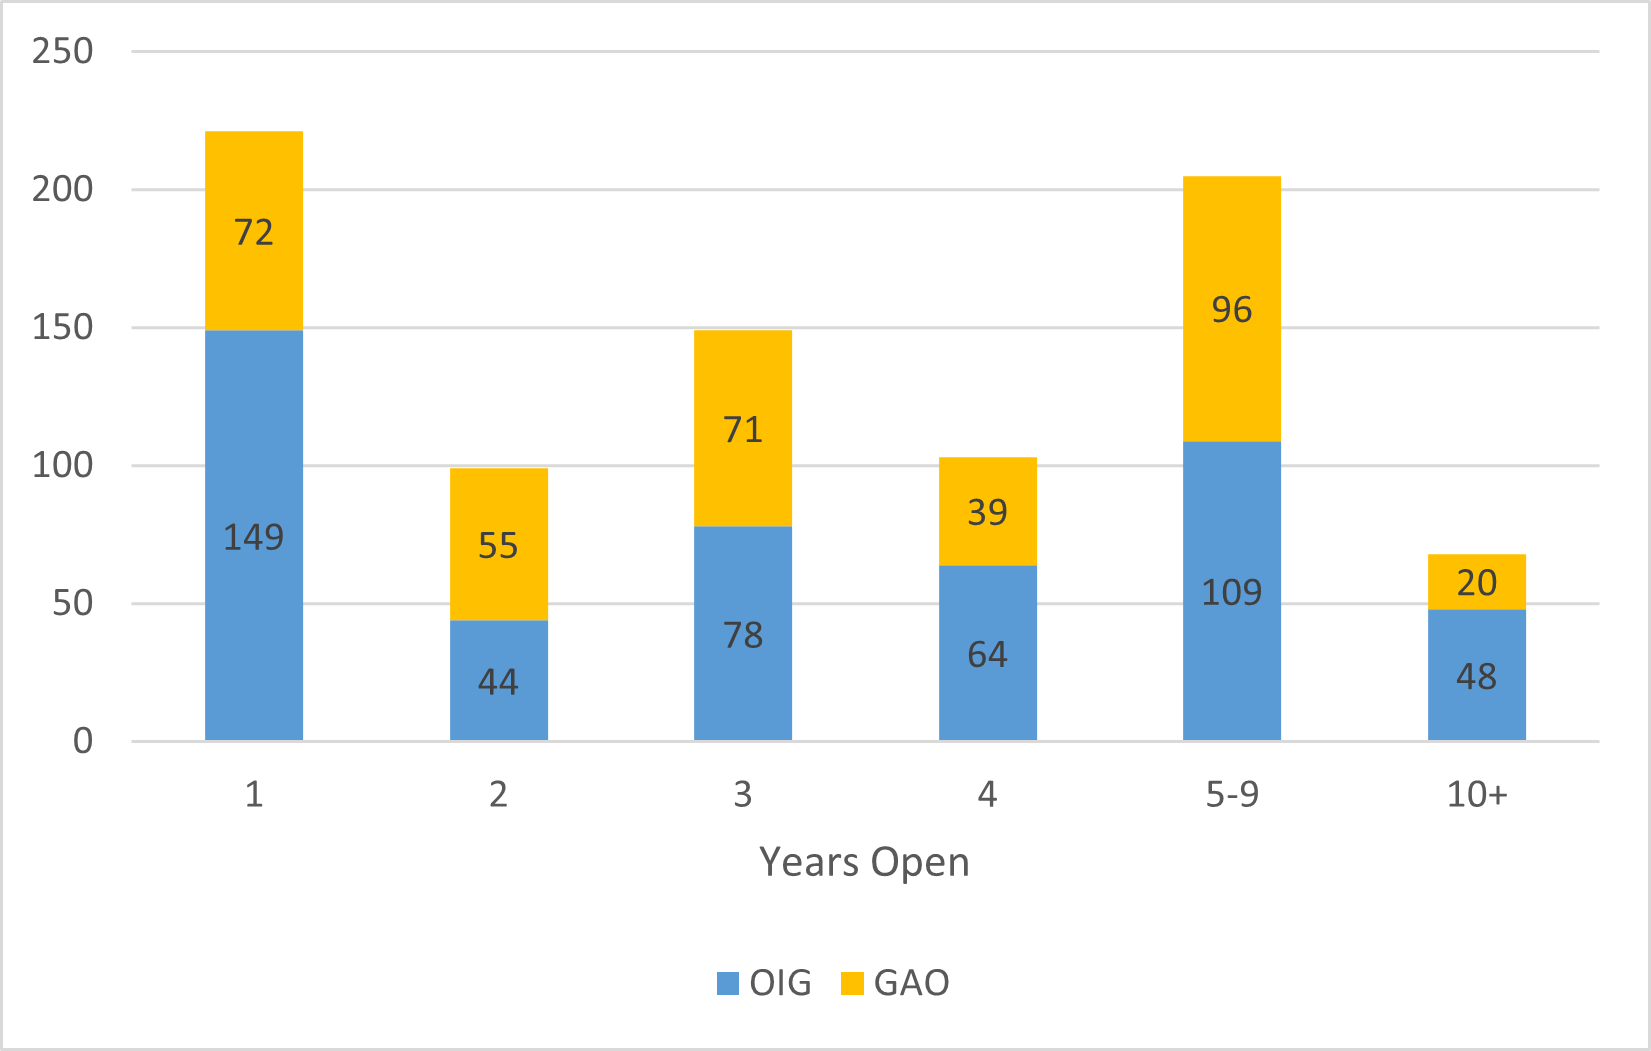 Bar chart showing the number of OIG and GAO recommendations open by year. 72 GAO and 149 OIG recommendations open 1 year; 55 GAO and 44 OIG recs open 2 years; 74 GAO and 78 recs open 3 years; 39 GAO and 64 OIF recs open 4 years; 96 GAO and 109 OIG recs open 5 to 9 years; 20 GAO and 48 OIG recs open more than 10 years